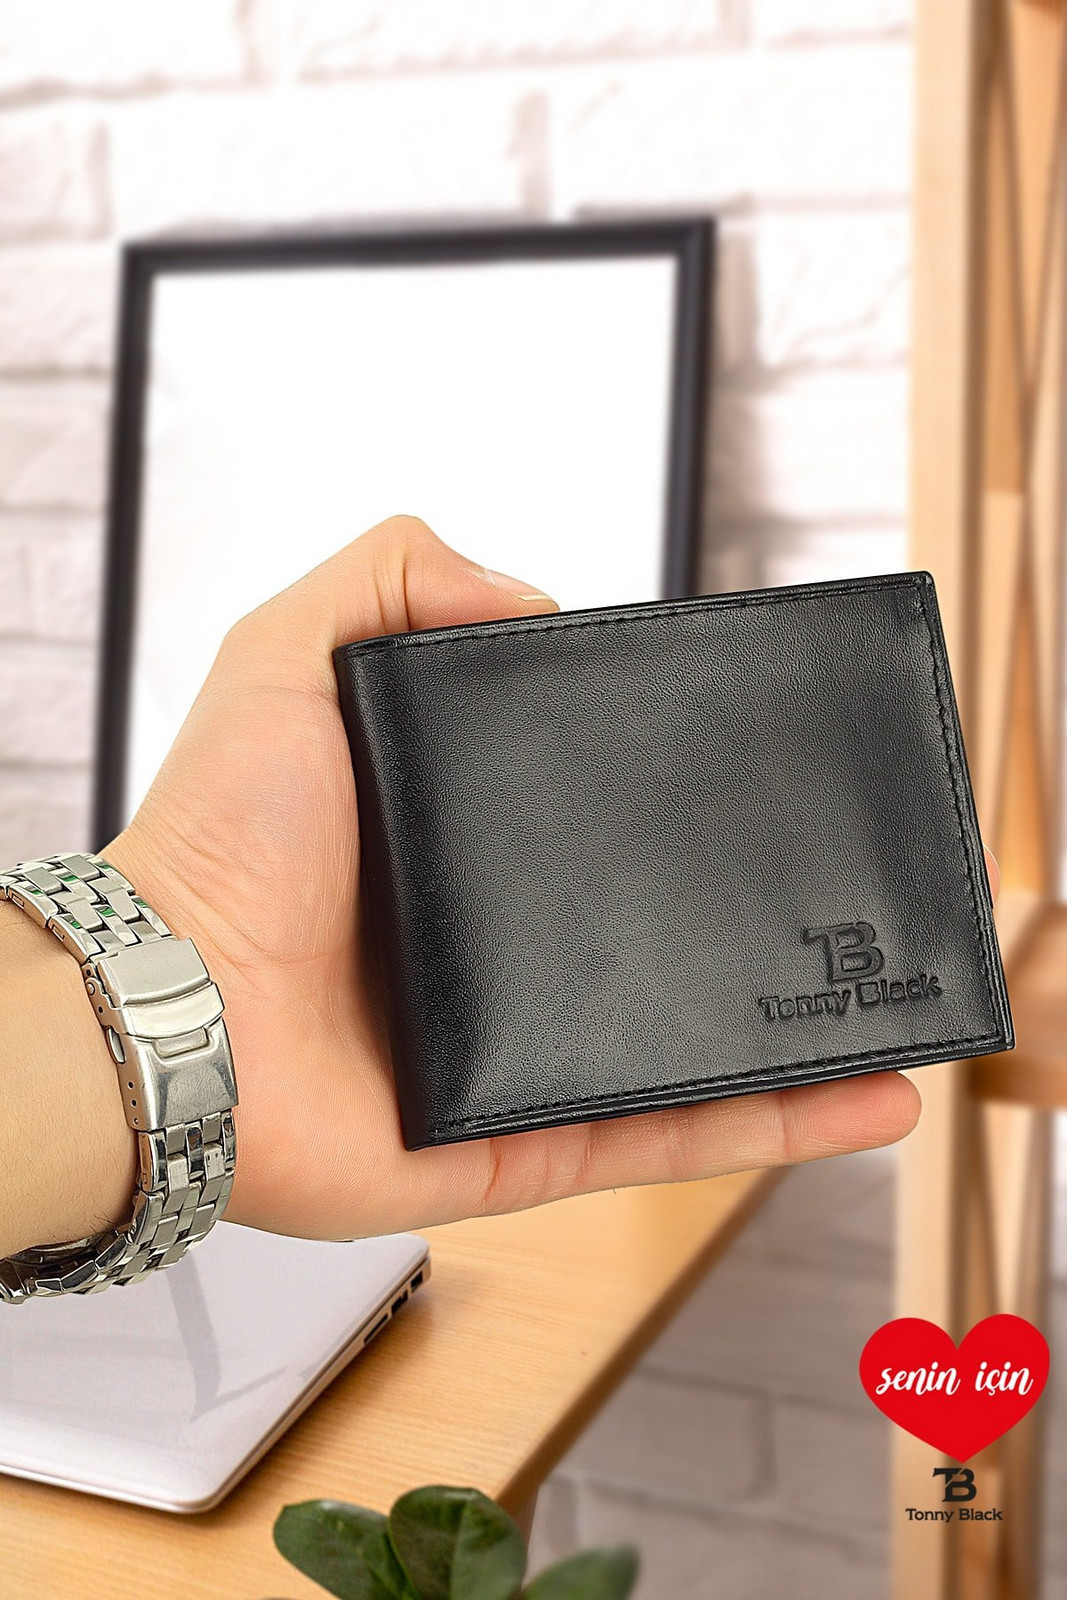 Tonny Black Original Men's Genuine Leather with Gift Box and Paper Money Compartment Classic Stylish Model Wallet with Card Holder Black.